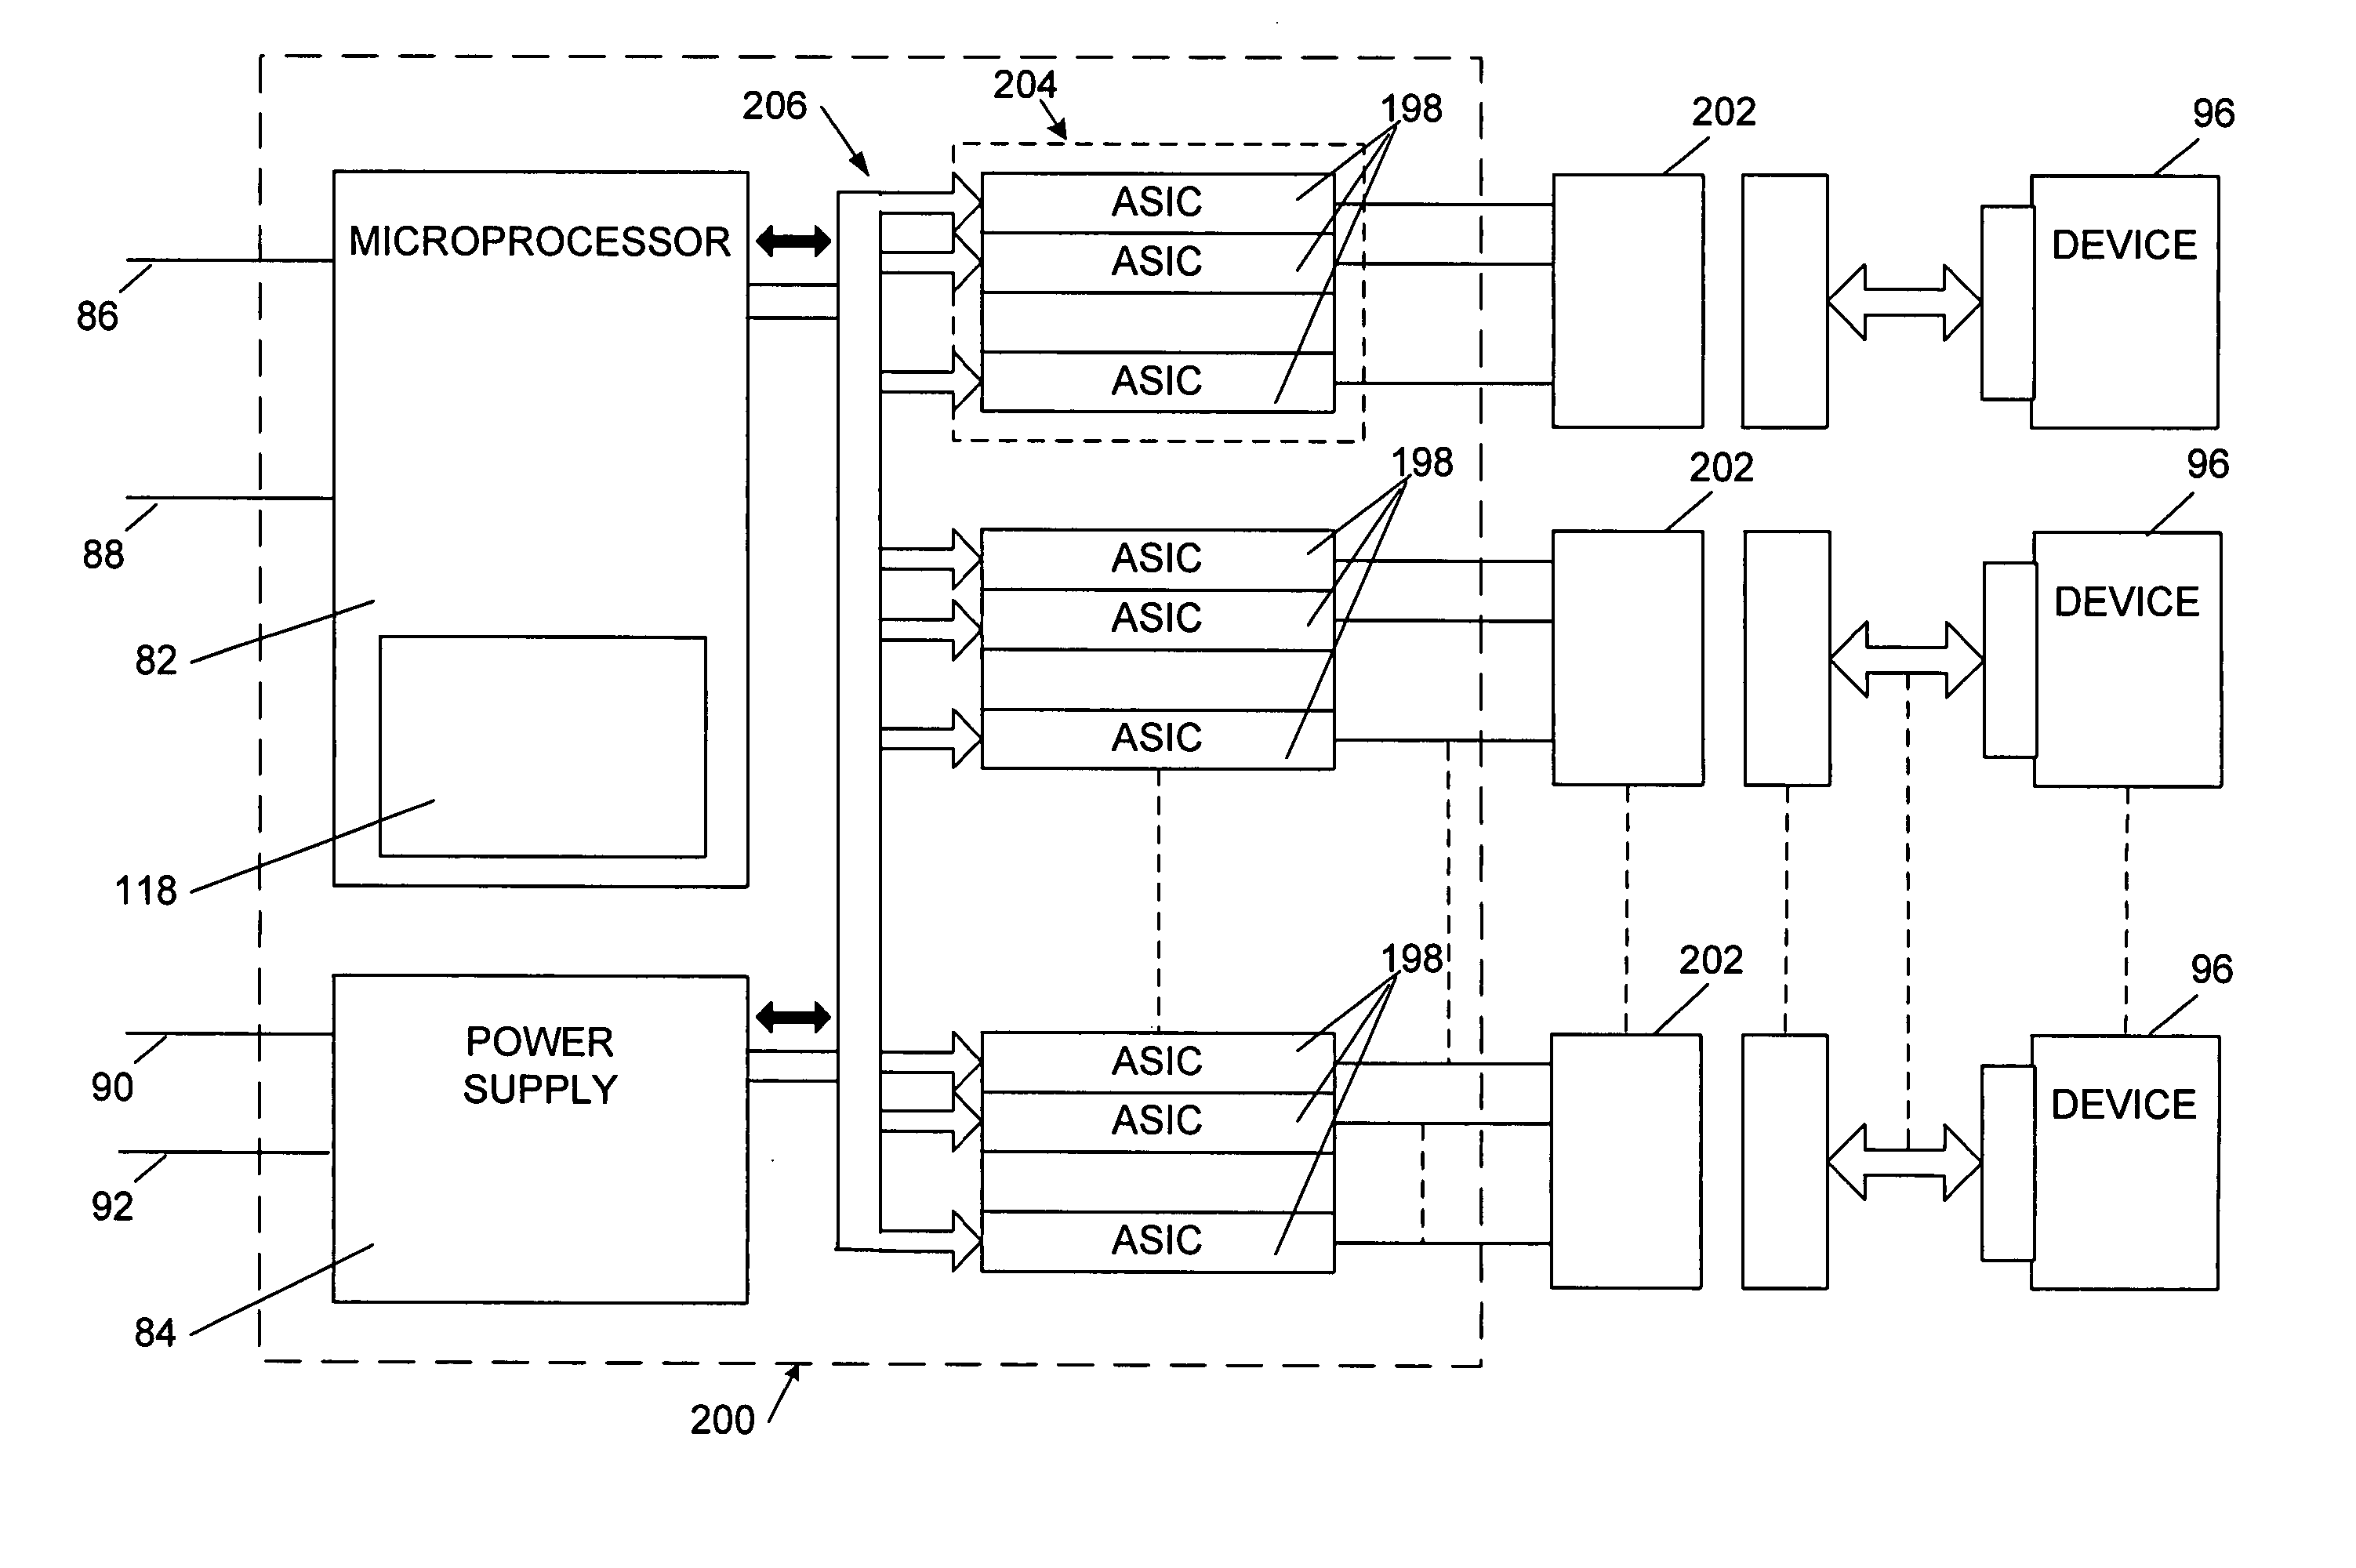 System for programmed control of signal input and output to and from cable conductors